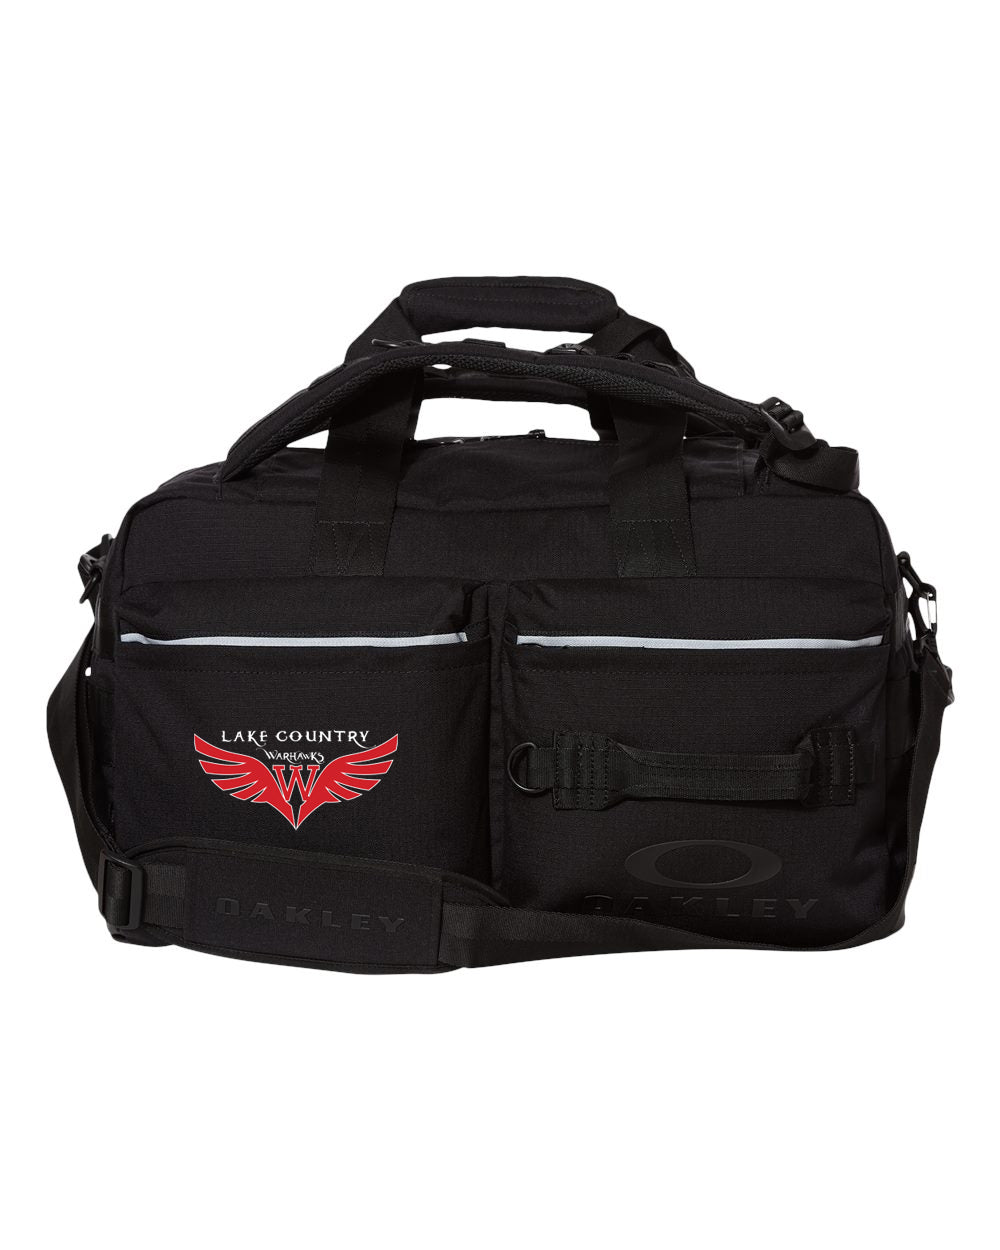 LC Warhawks Oakley 50L Utility Duffel Bag - with Backpack Carry straps! - Redwolf Jersey Works